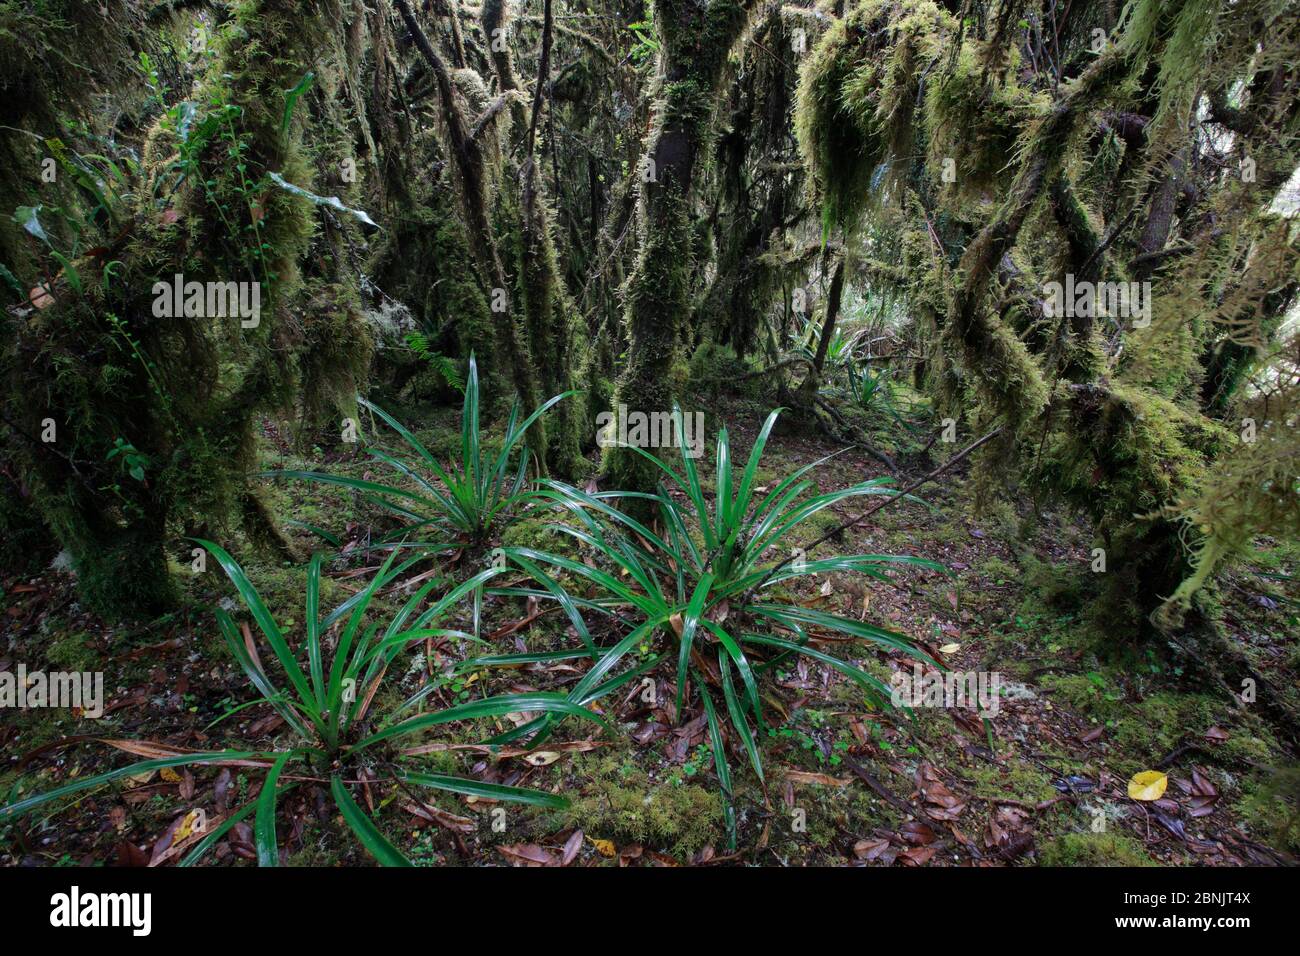 High altitude Paramo ecosystem with dwarf trees and mosses, Chingaza NP, Colombia. Stock Photo